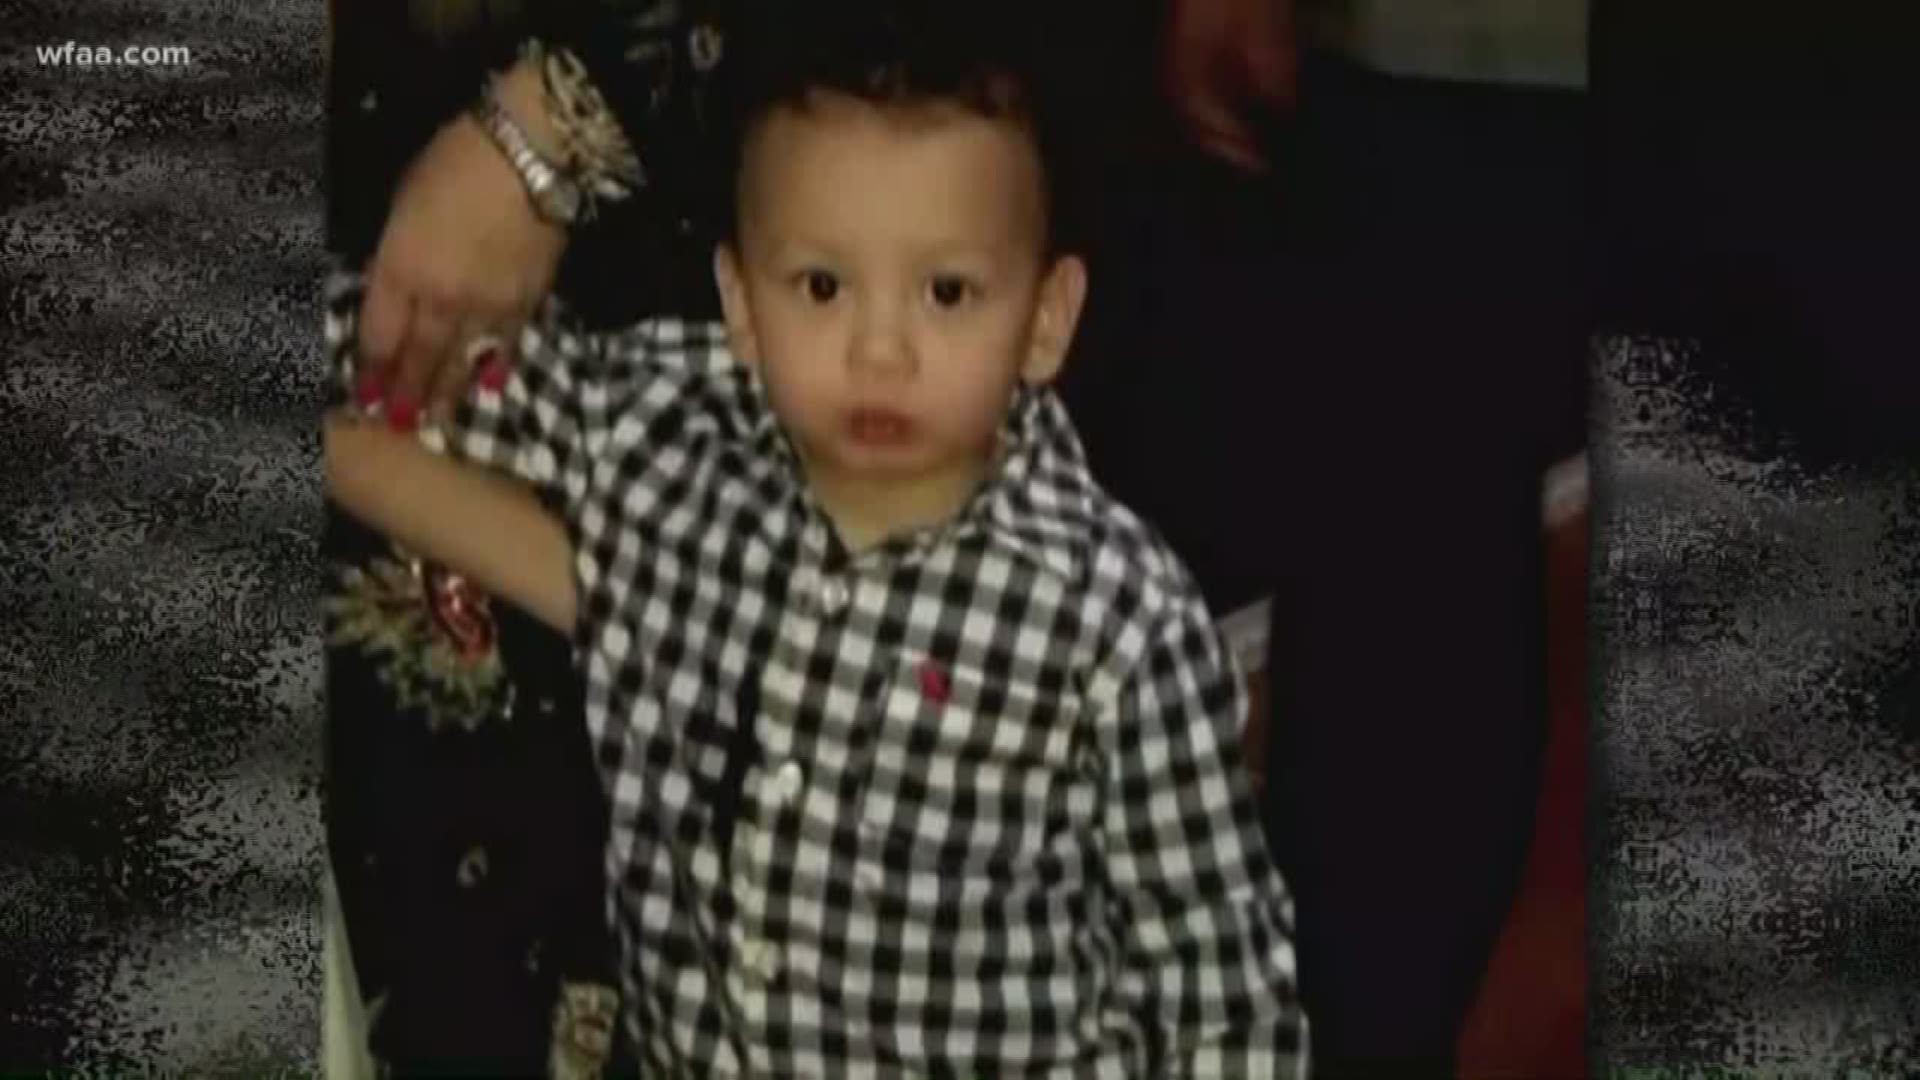 Massive search for missing toddler in Denton